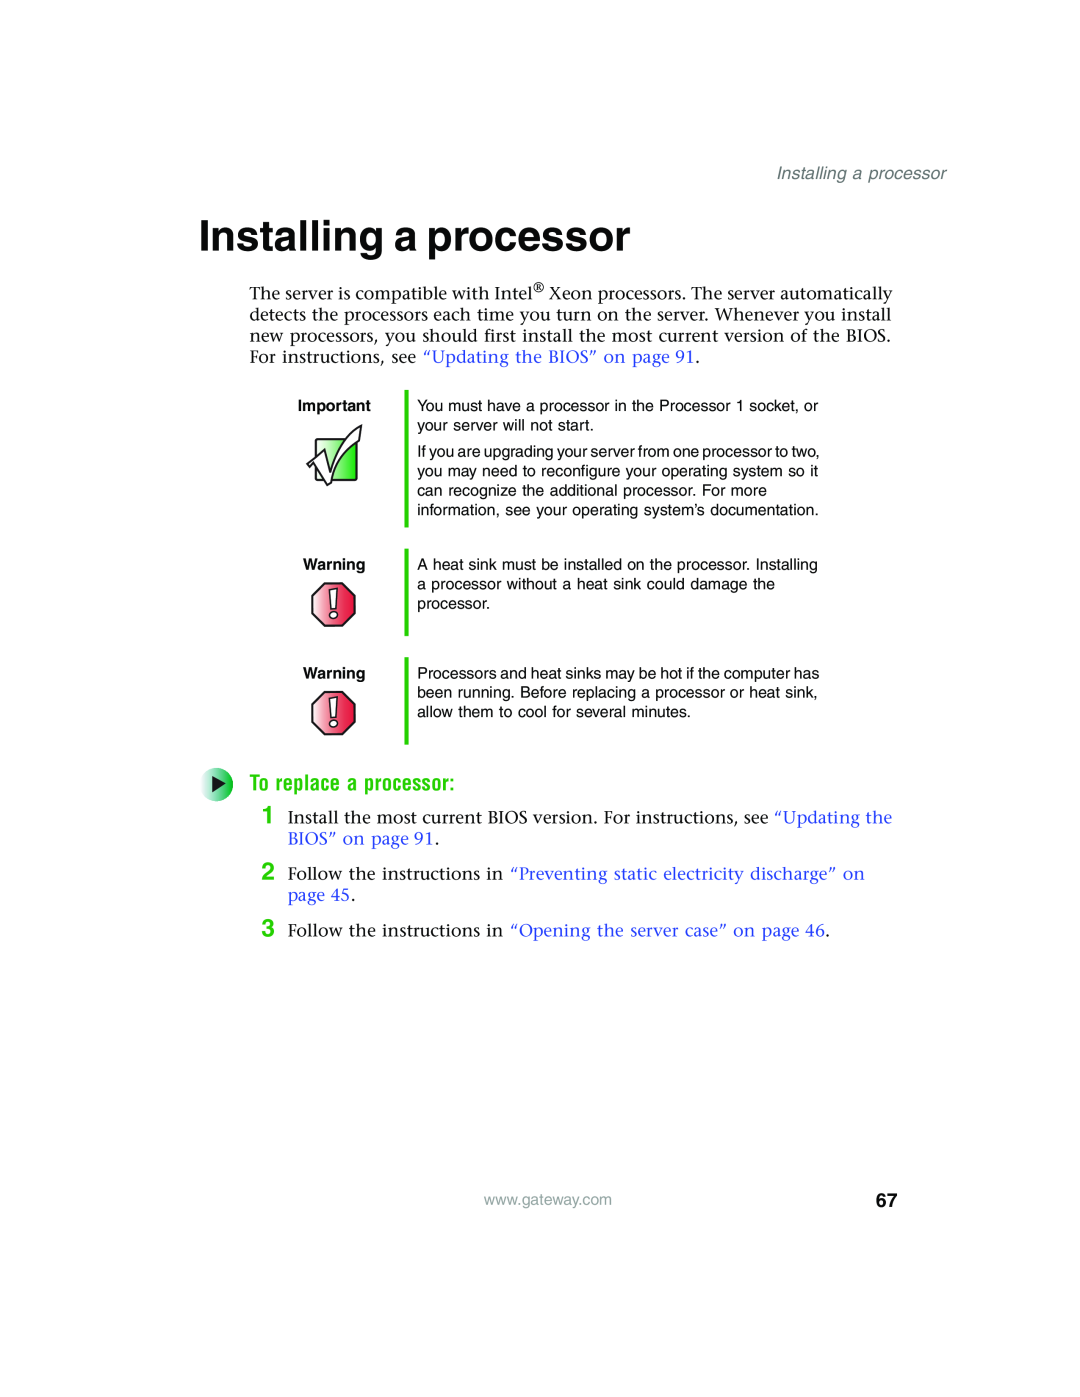 Gateway 955 Installing a processor, To replace a processor, Follow the instructions in “Opening the server case” on page 